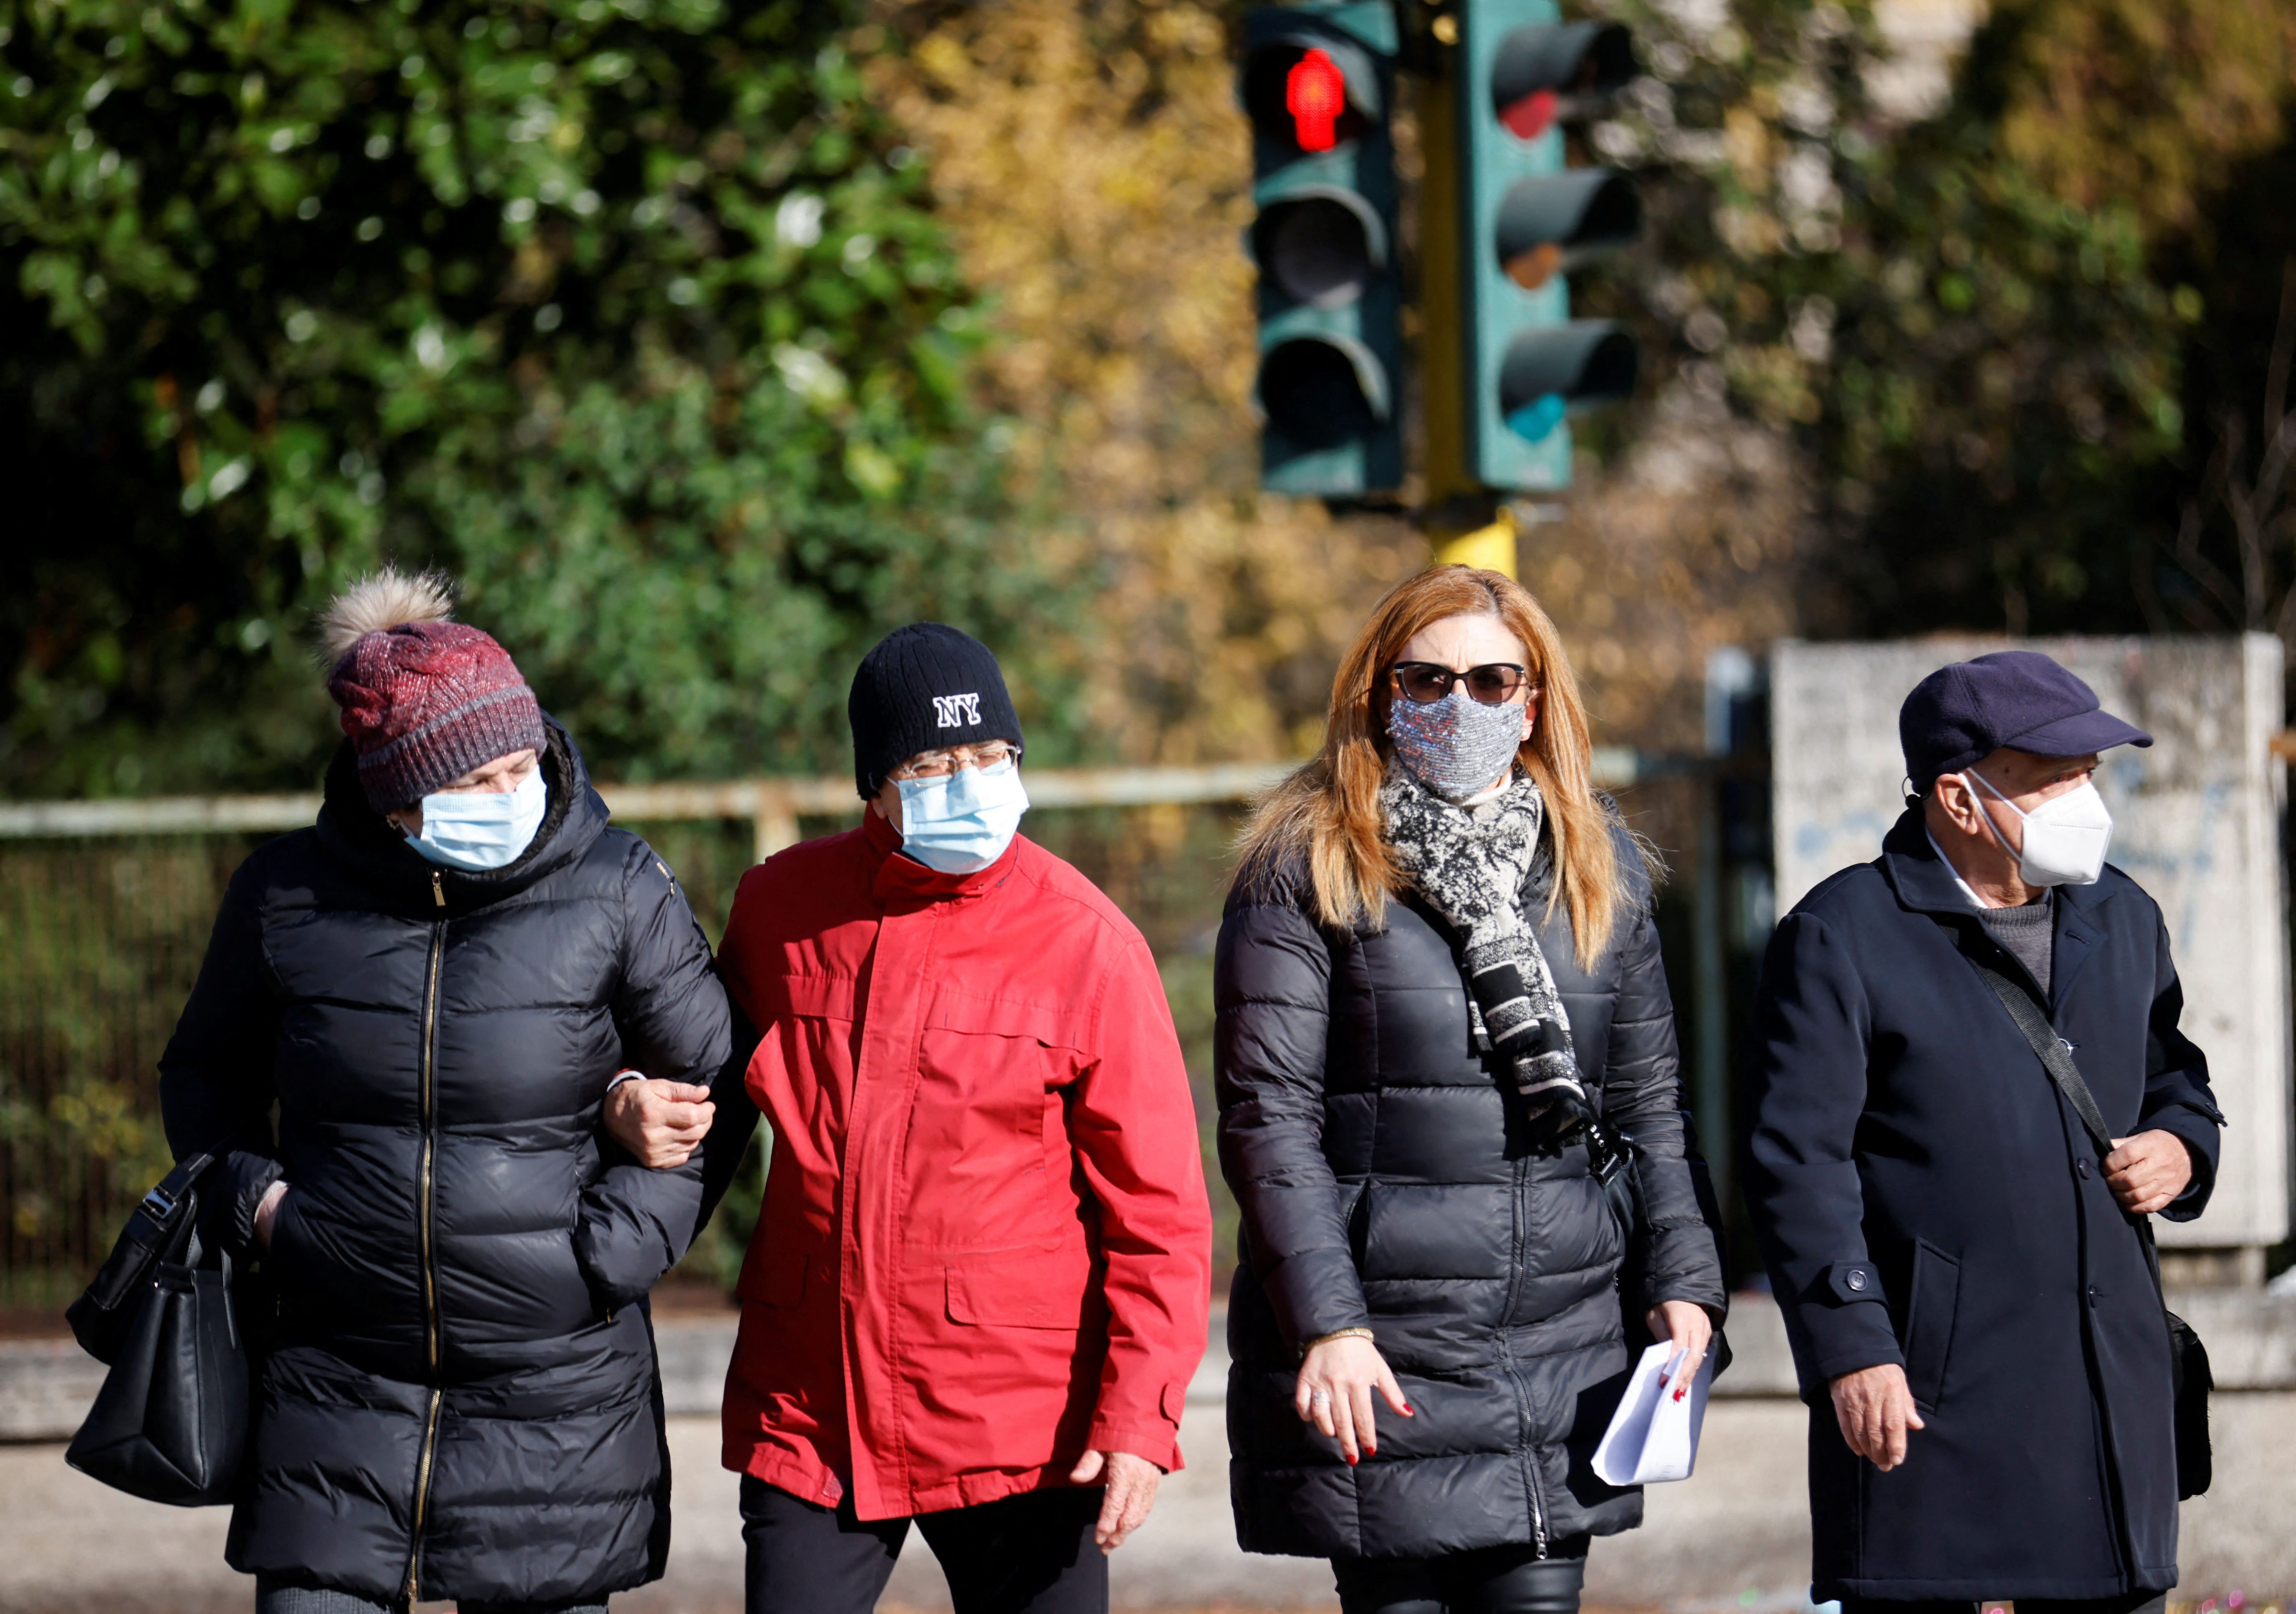 Region of Lazio makes face masks mandatory outdoors as COVID-19 cases rise and Christmas nears, in Rome